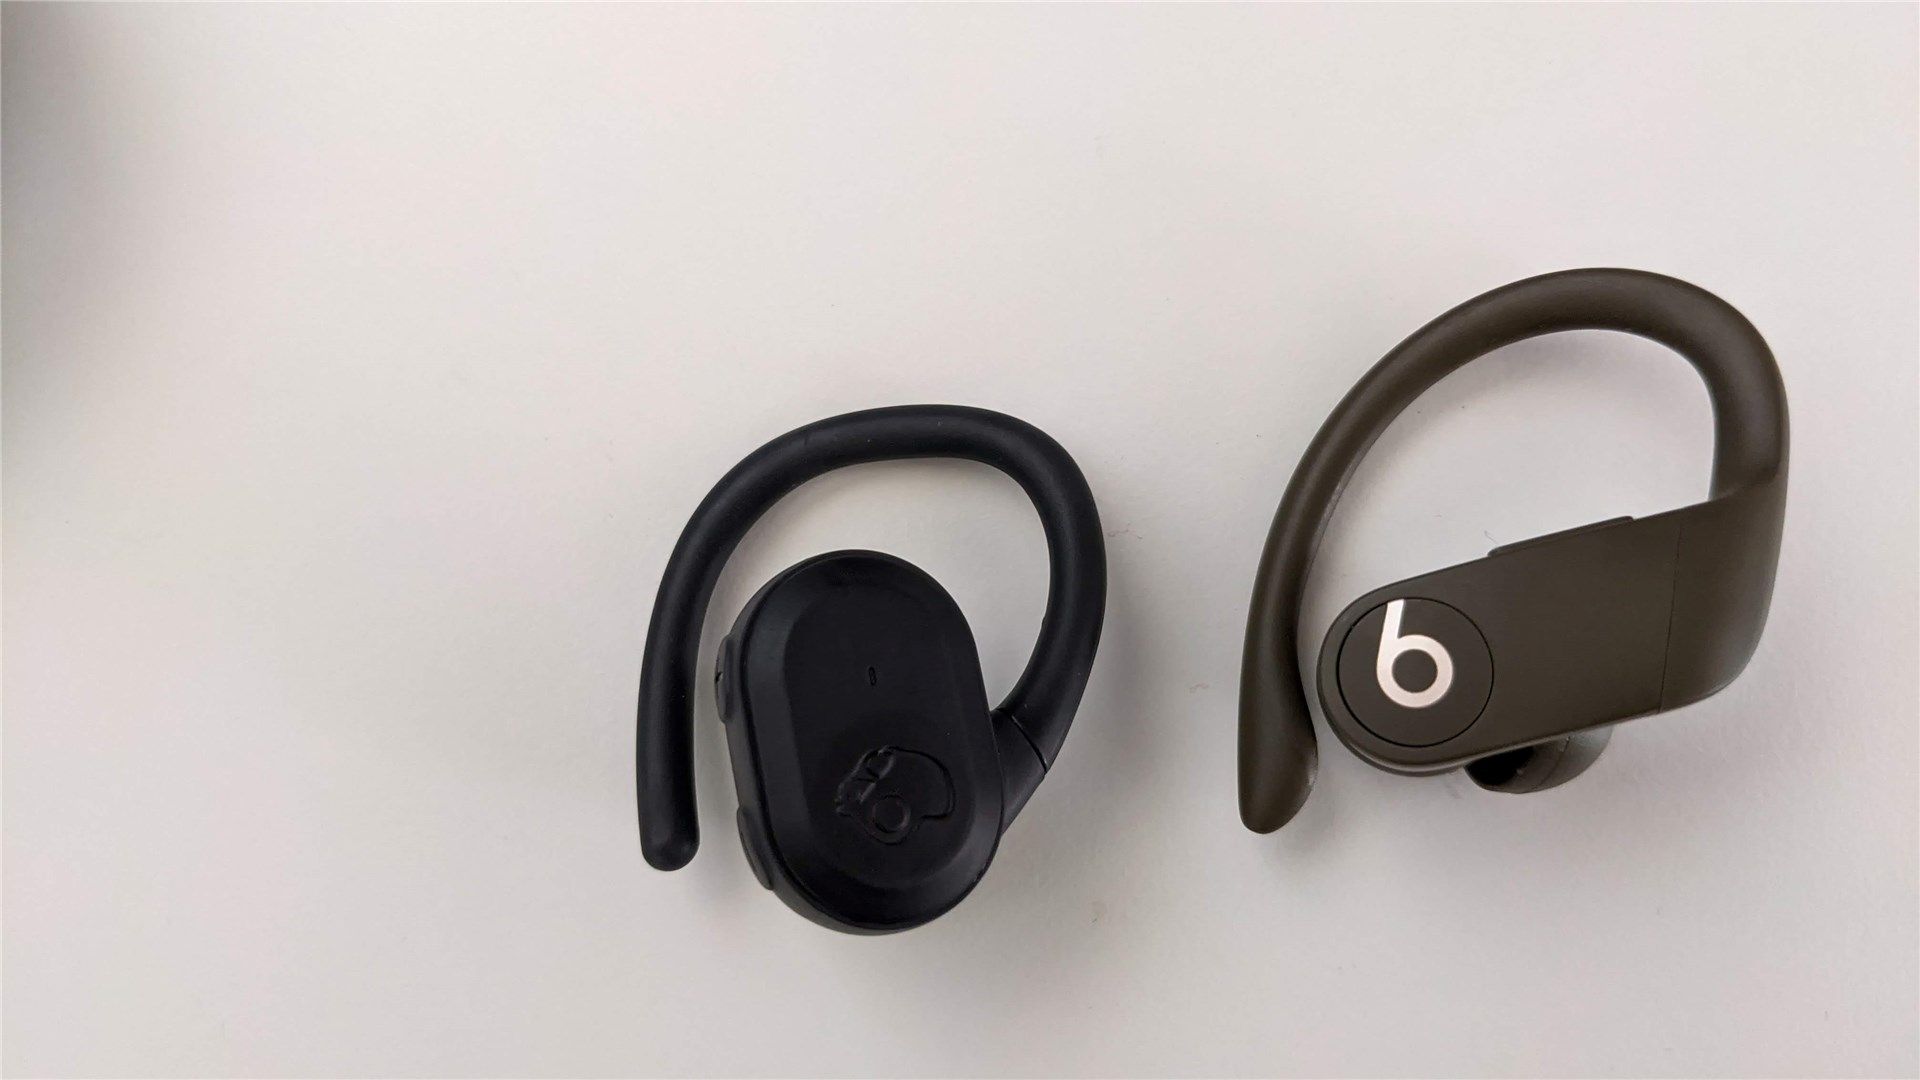 The right Push Ultra compared to the right PowerBeats Pro